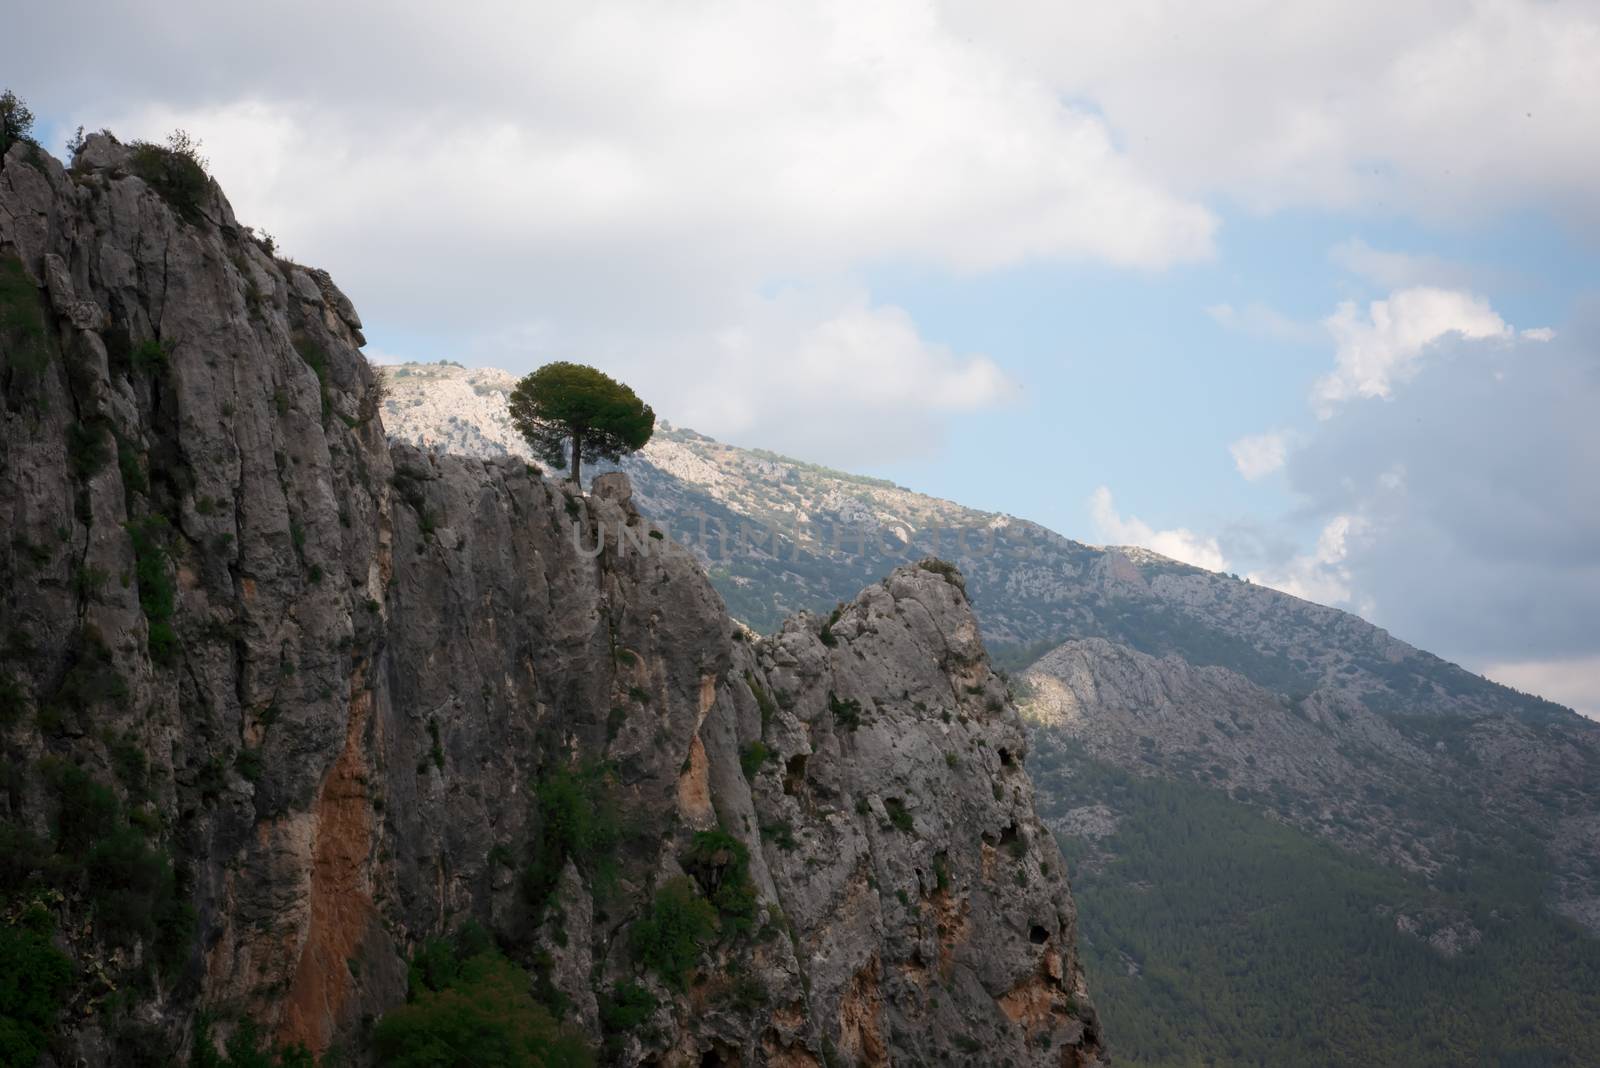 Lonely tree on top of a mountain near Guadalest in Alicante . by LarisaP